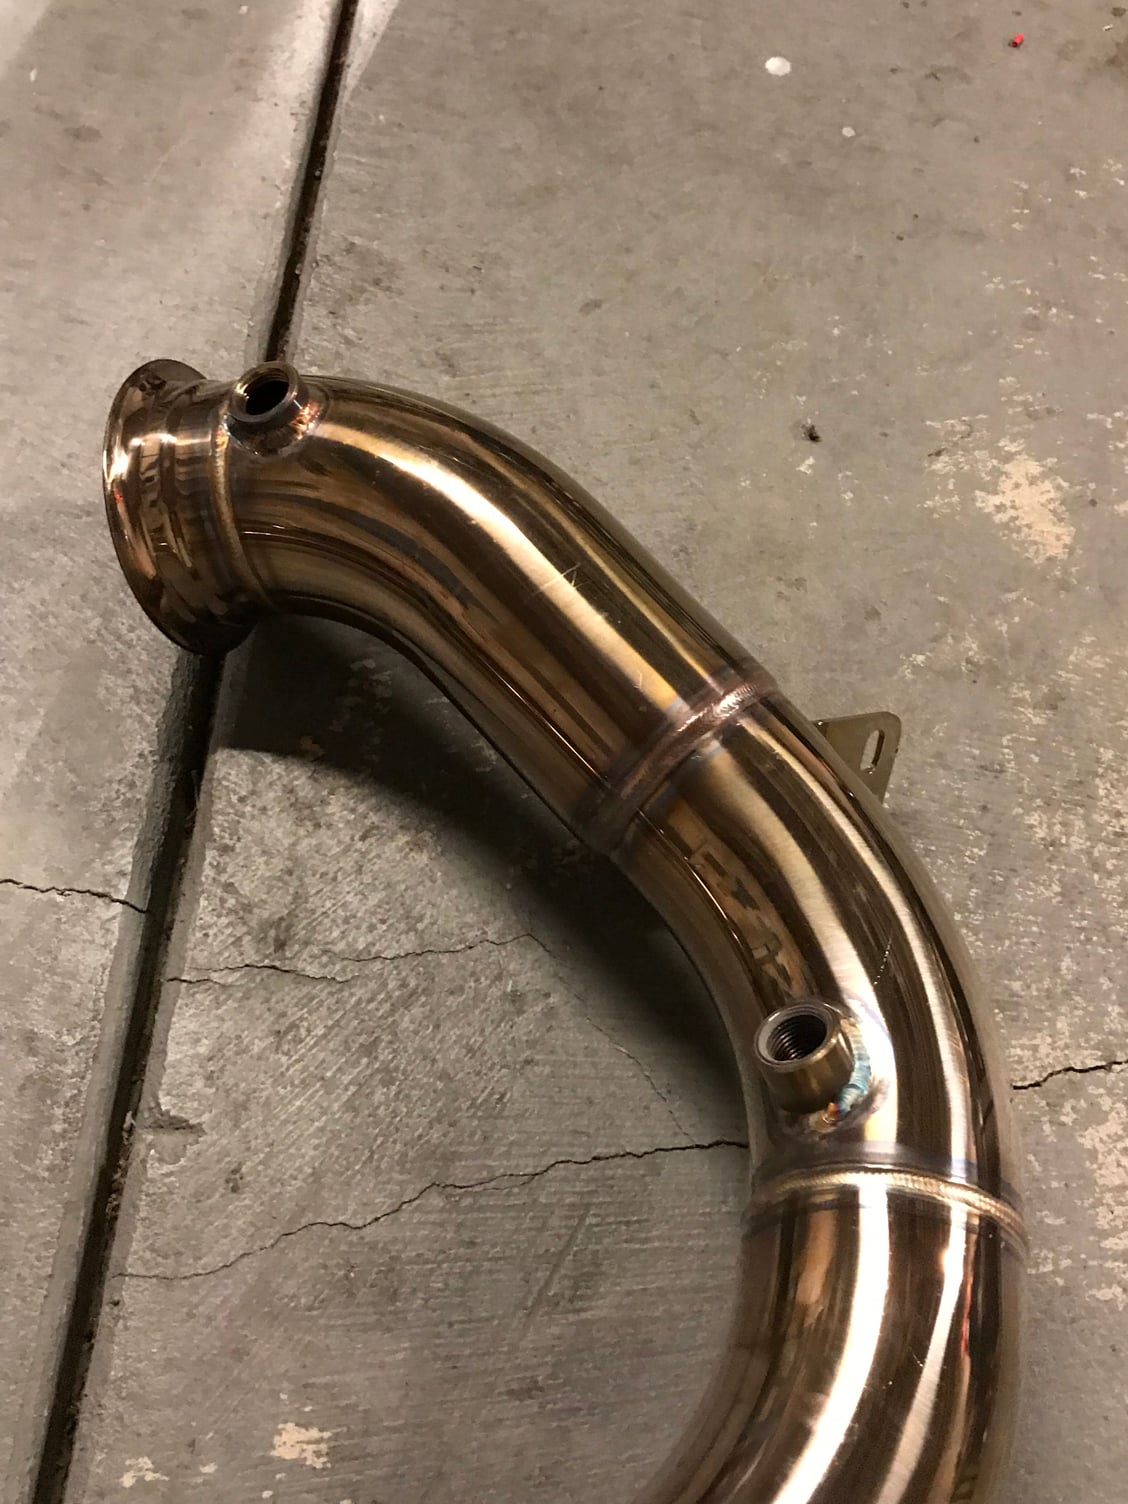 Engine - Exhaust - FI Downpipes W205 C63S - Used - 2017 Mercedes-Benz C63 AMG - San Jose, CA 95035, United States